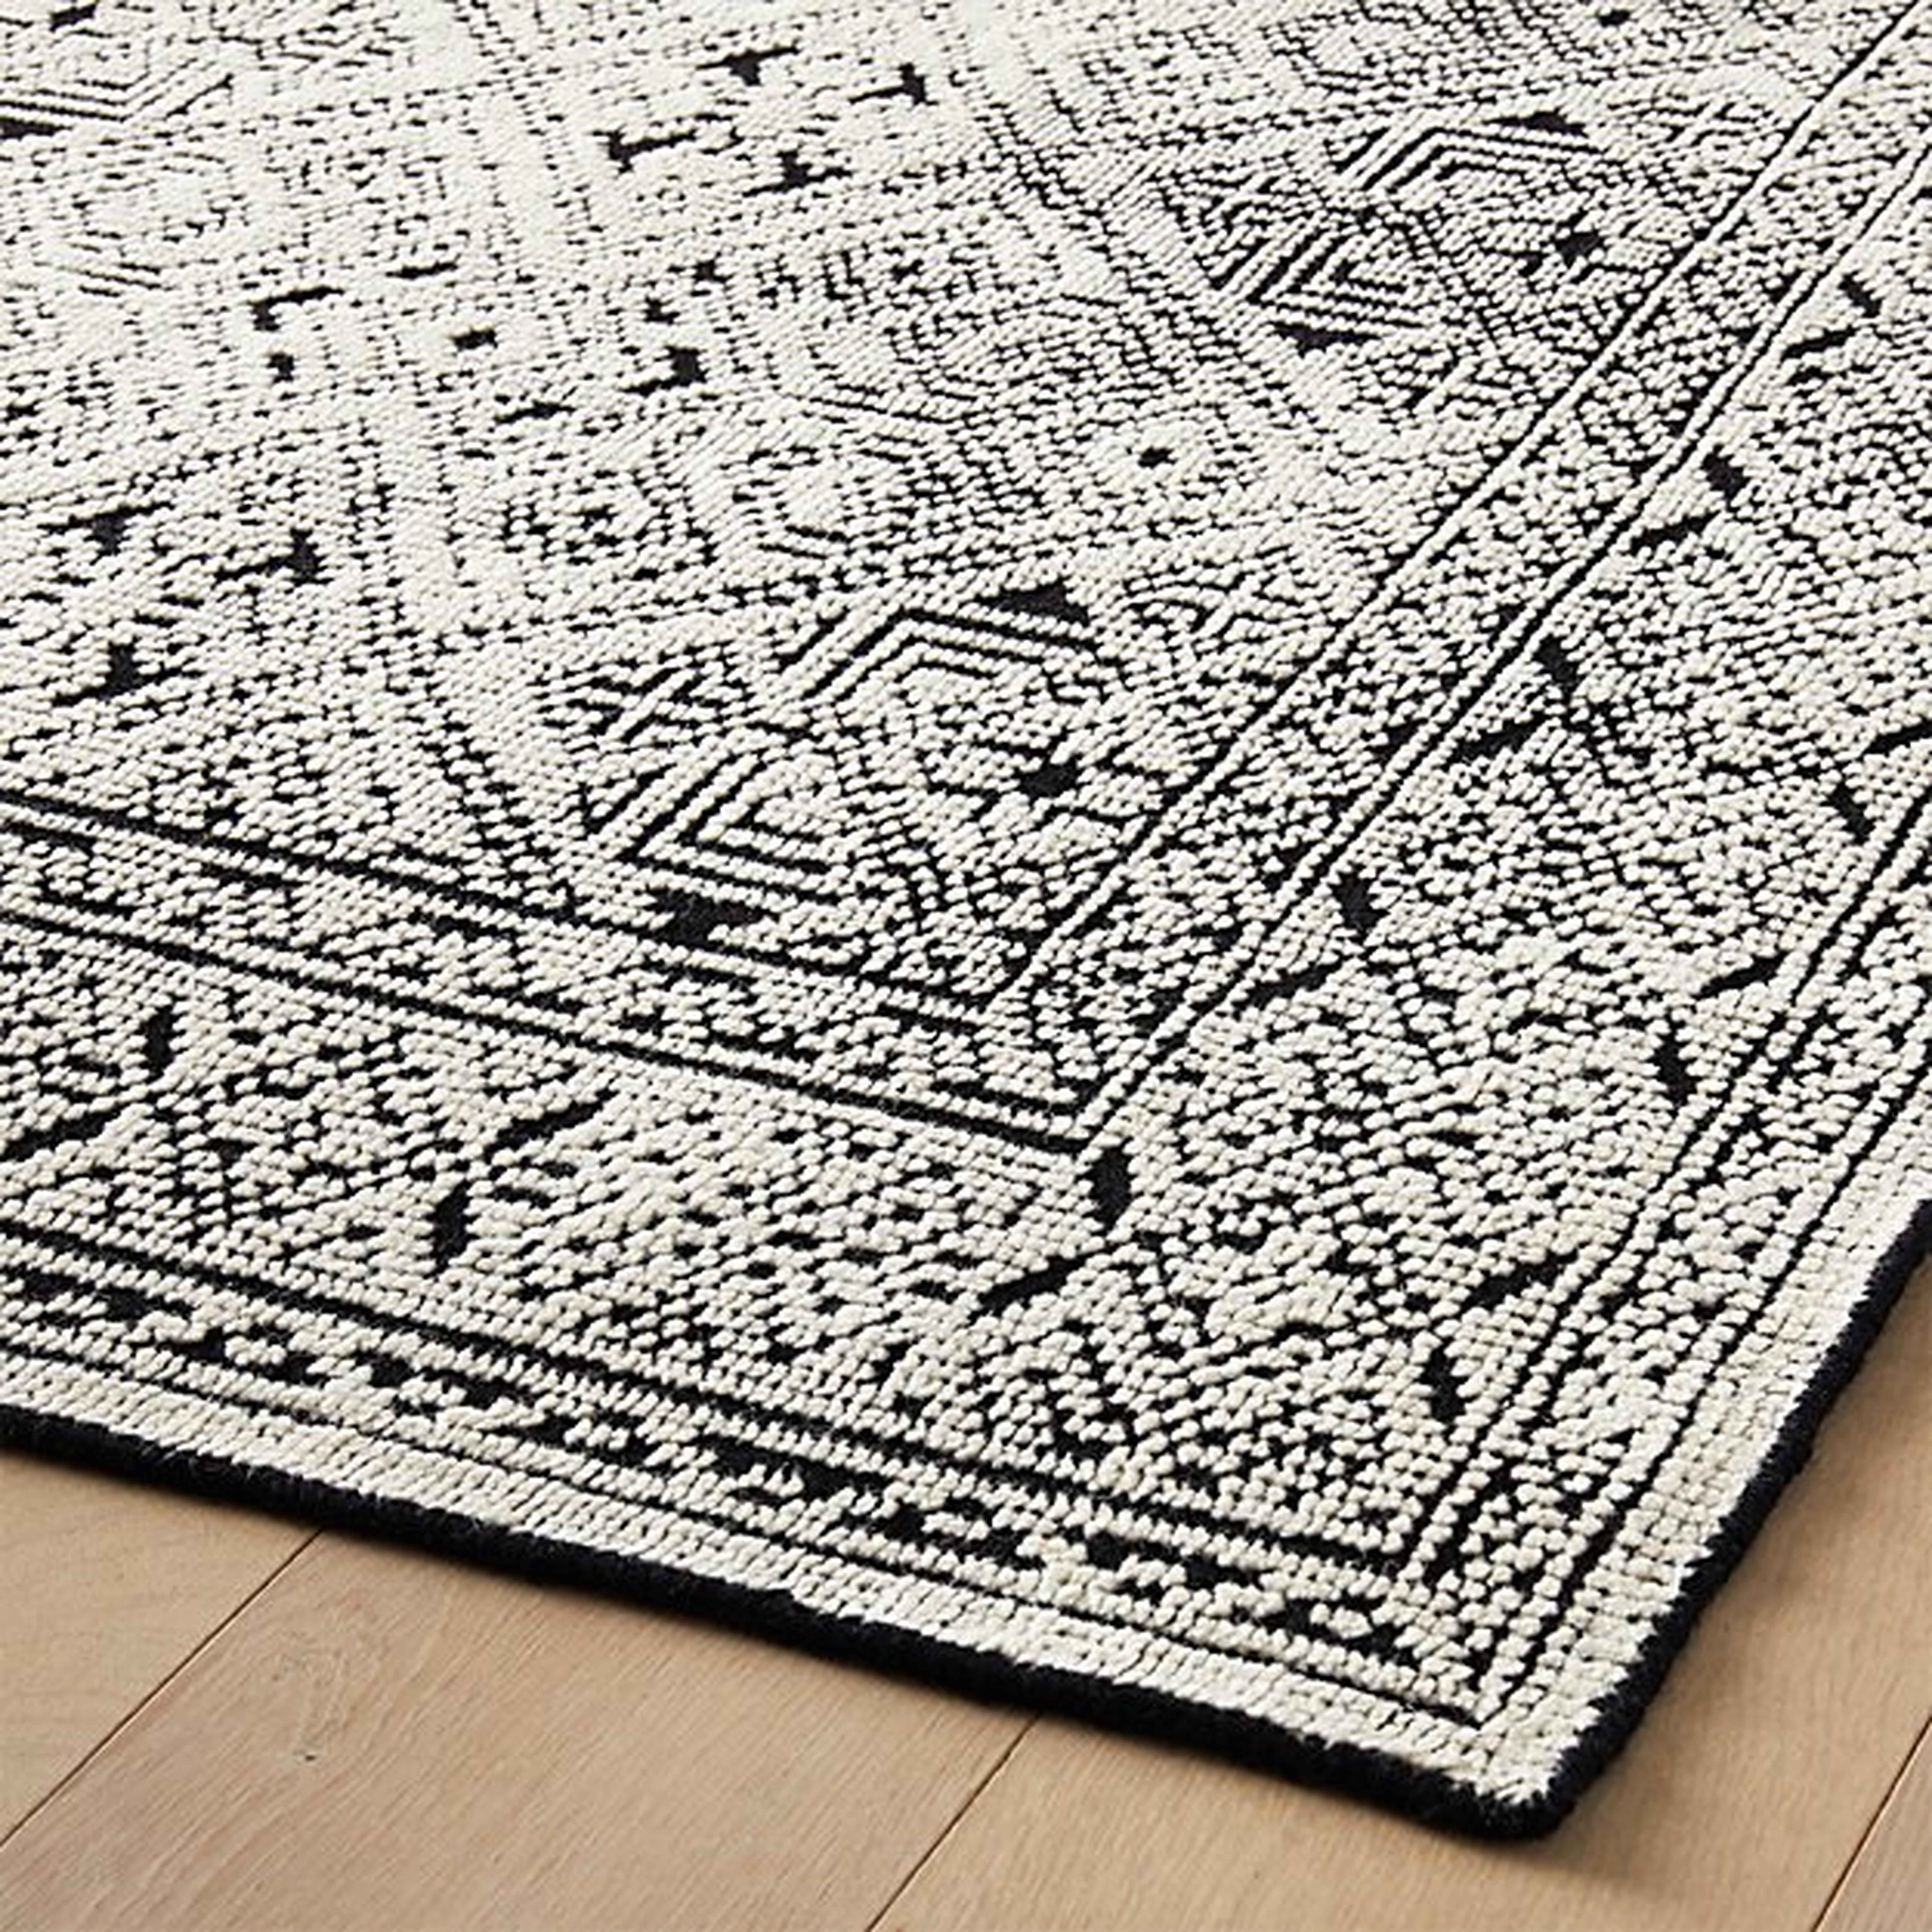 Raumont Hand-Knotted Black Detailed Modern Area Rug 6'x9' - CB2